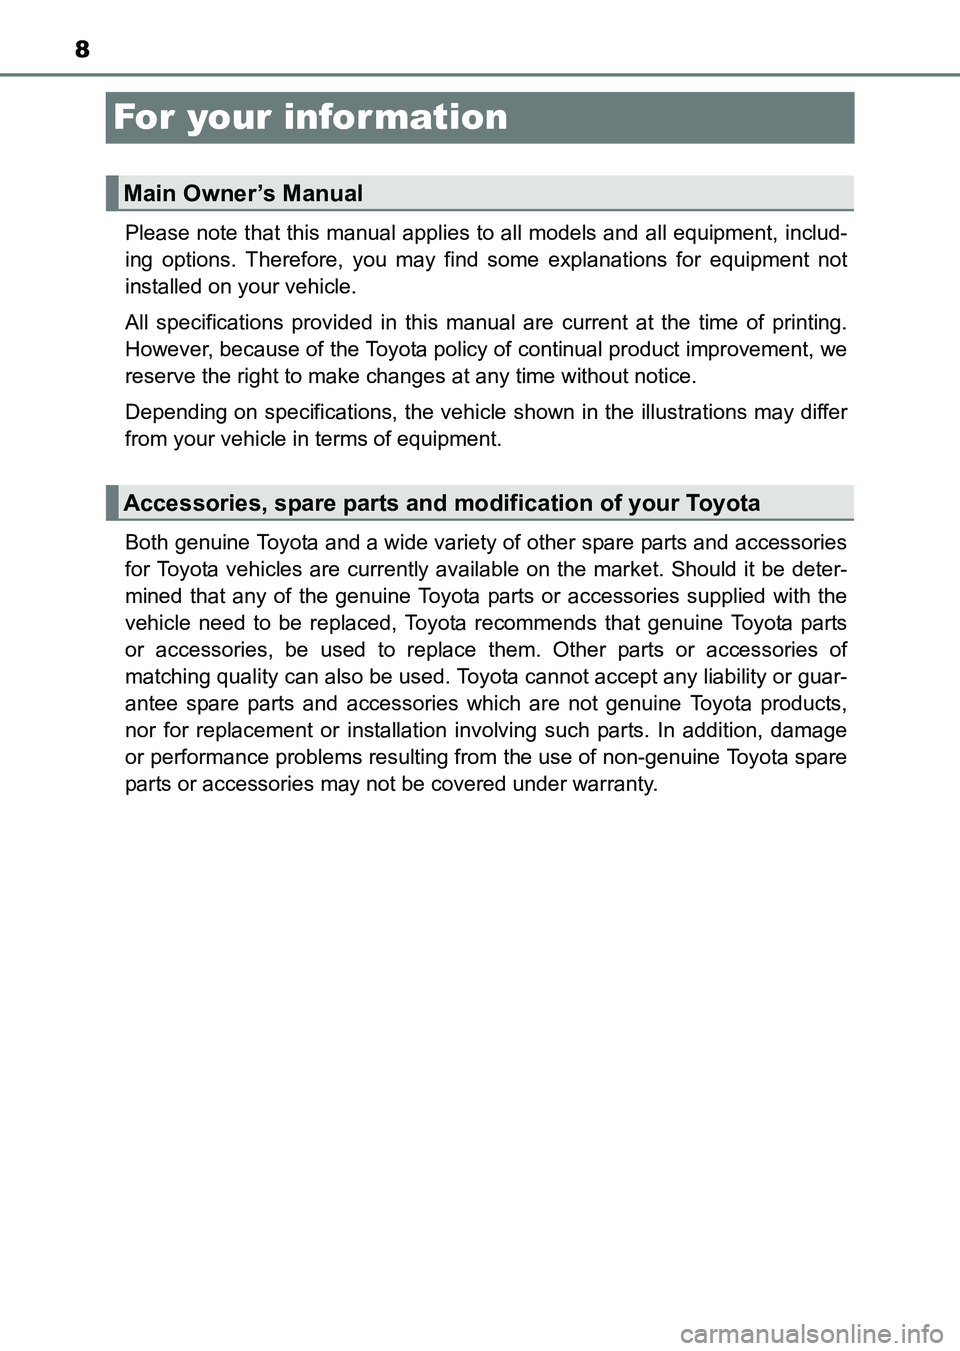 TOYOTA HILUX 2015  Owners Manual (in English) 8
HILUX_OM_OM0K219E_(EE)
For your infor mation
Please note that this manual applies to all models and all equipment, includ-
ing options. Therefore, you may find some explanations for equipment not
in